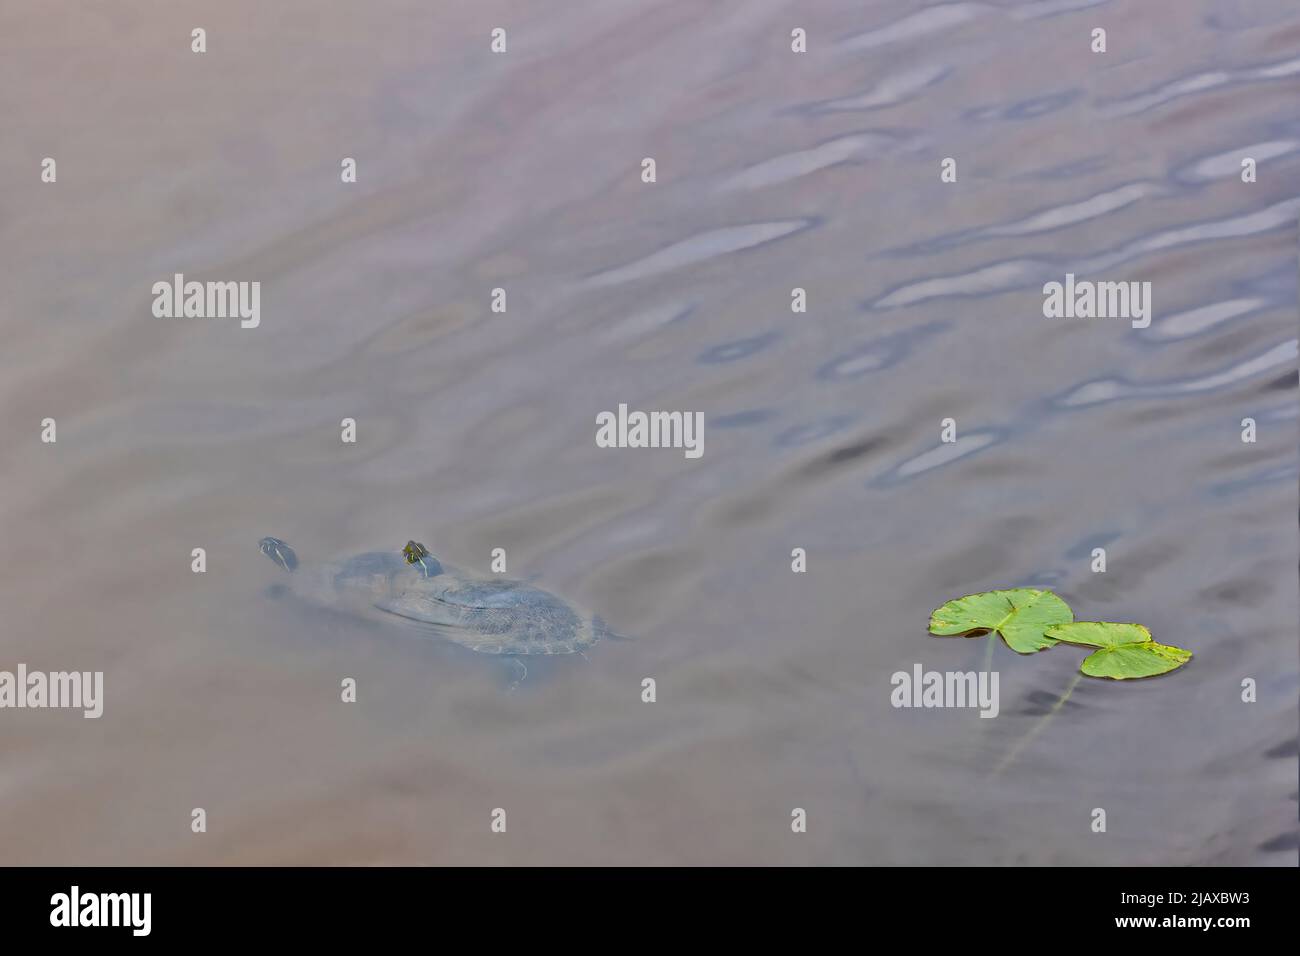 Turtles swiming in pond water with copy space and backgrounds. Stock Photo